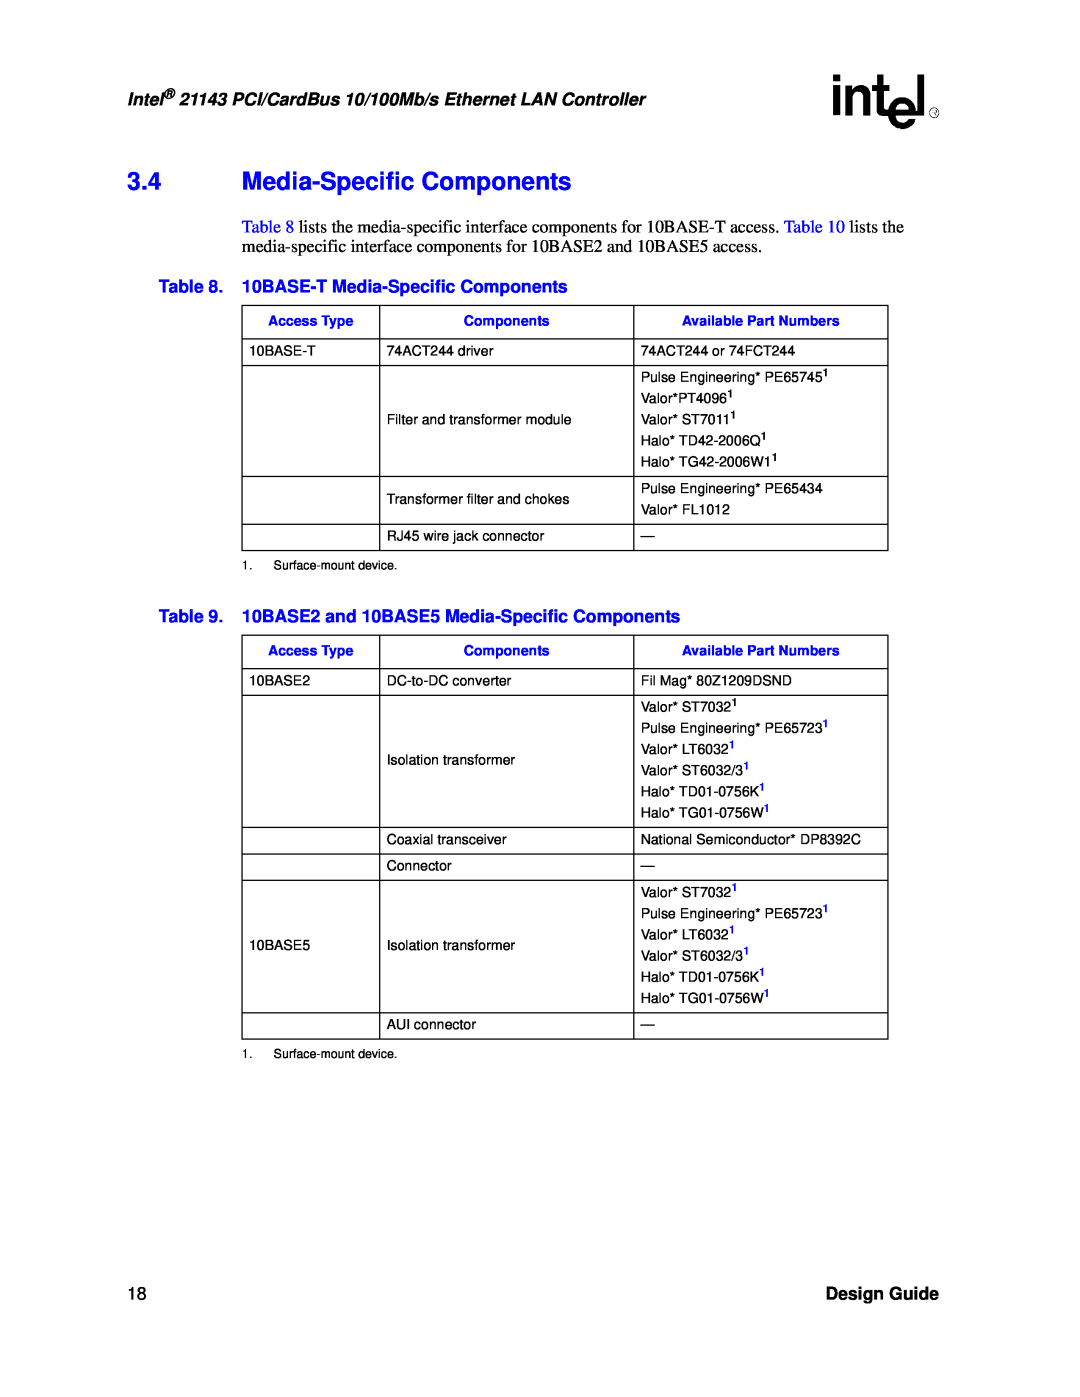 Intel 21143 manual 10BASE-T Media-Specific Components, 10BASE2 and 10BASE5 Media-Specific Components, Design Guide 